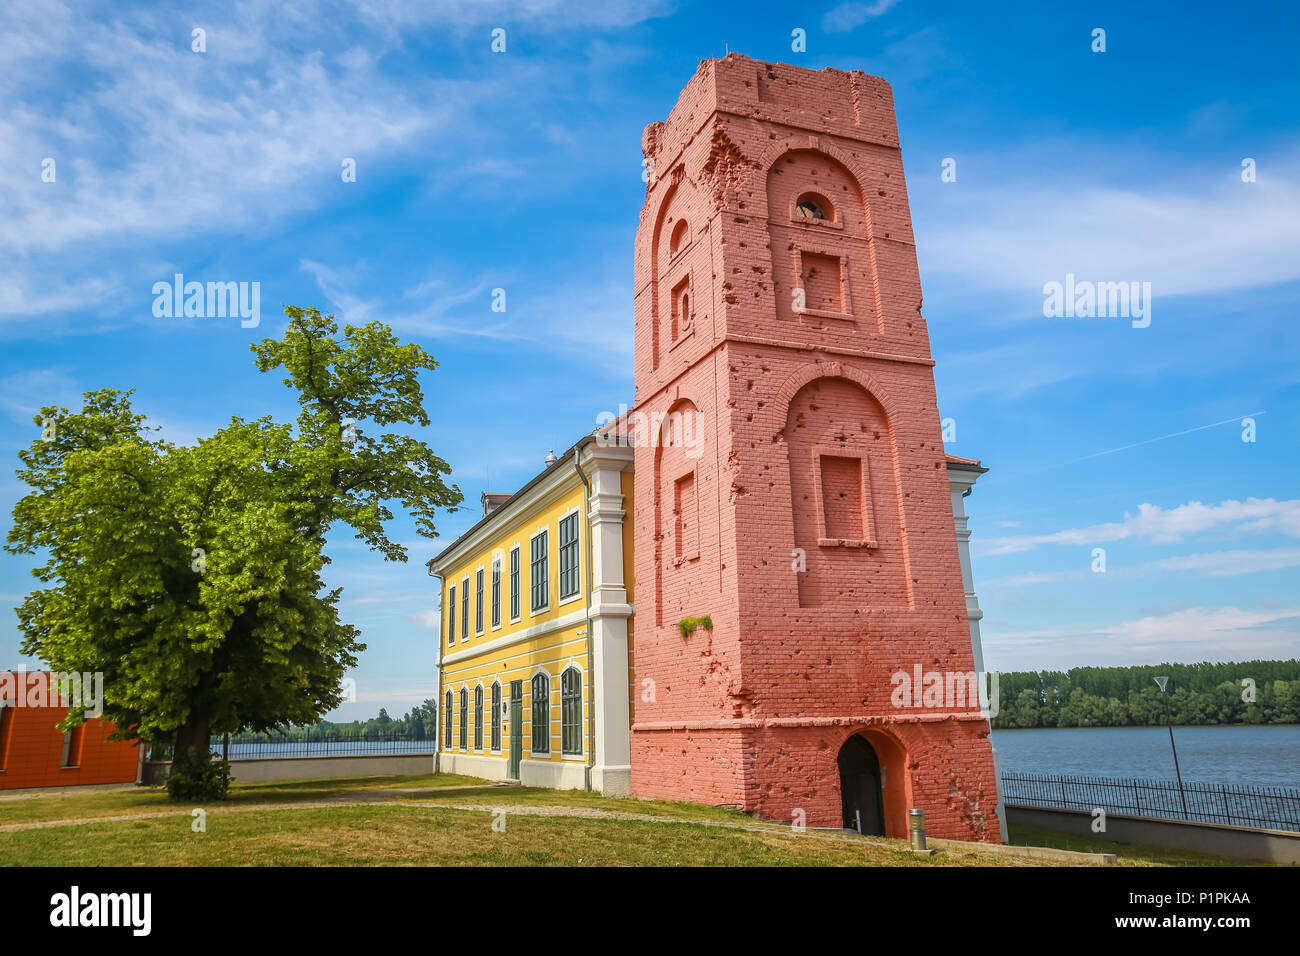 VUKOVAR, CROATIA - MAY 14, 2018 : Renovated tower that is part of the City museum on the coast of river Danube in Vukovar, Croatia. Stock Photo